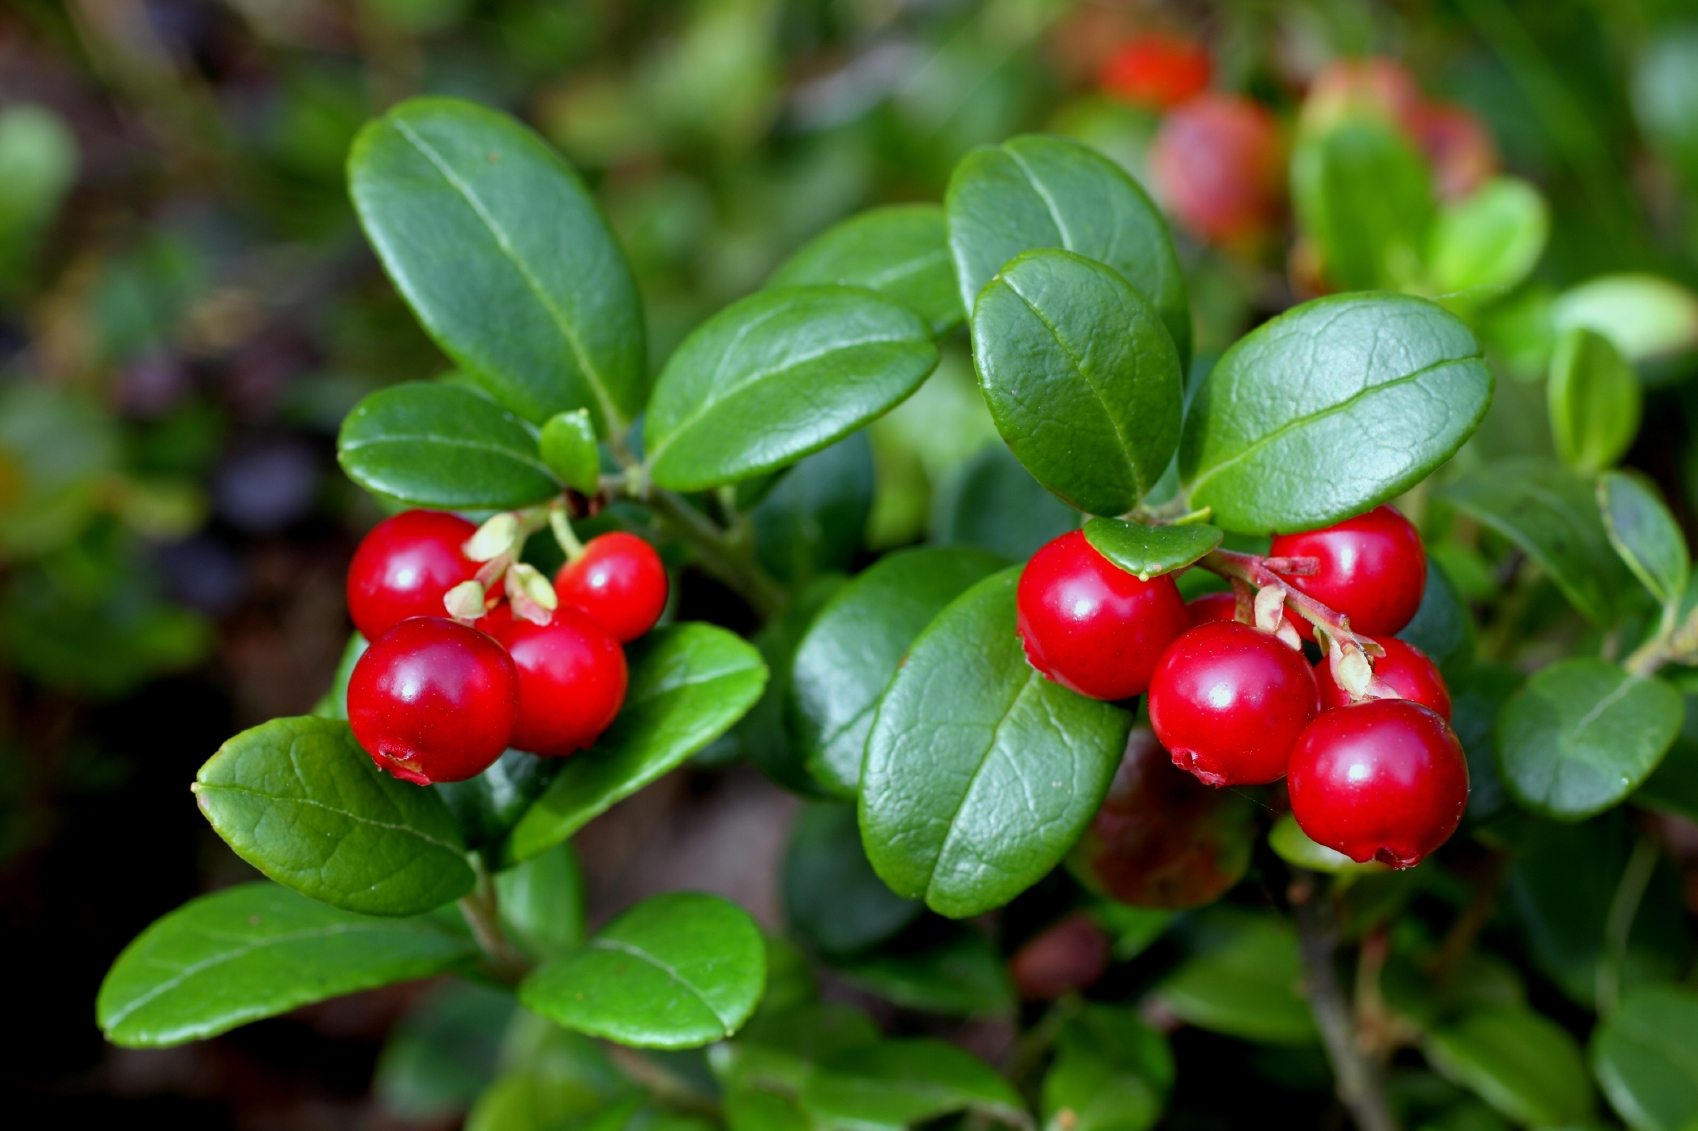 Lingonberry Information ? Learn How To Grow Lingonberries At Home